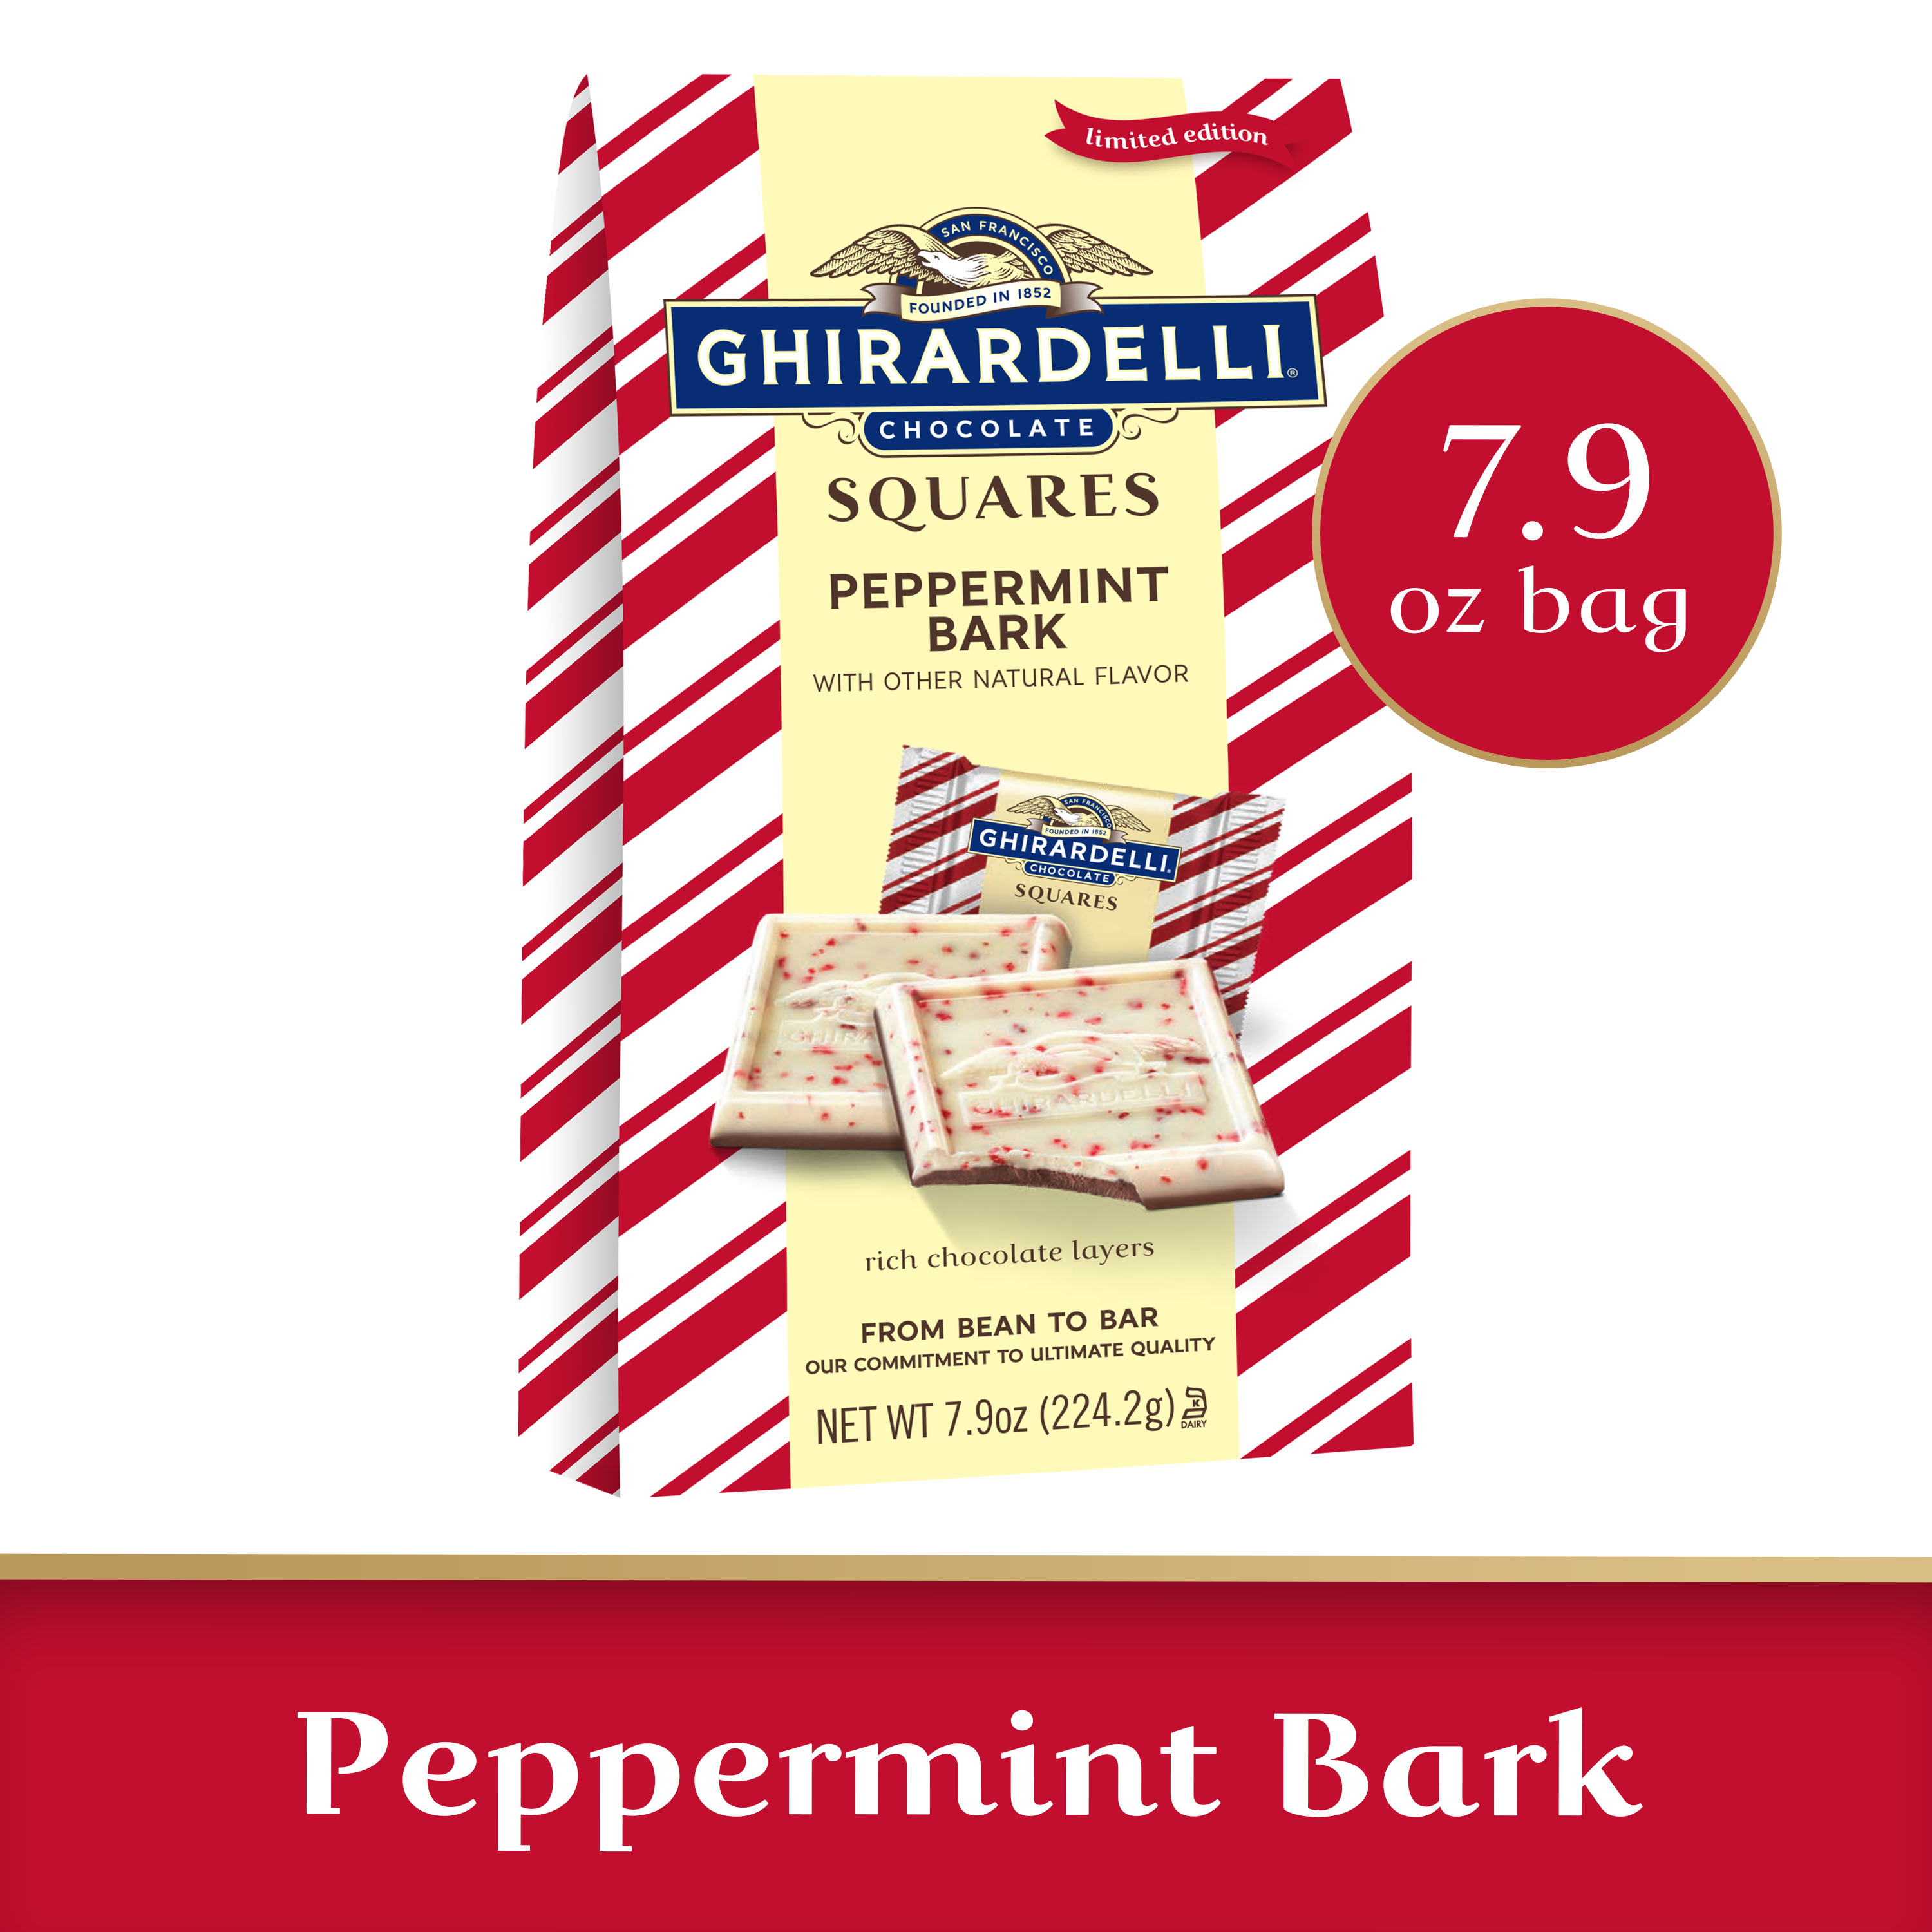 GHIRARDELLI Peppermint Bark Chocolate Squares, 7.9 oz Bag - image 1 of 10